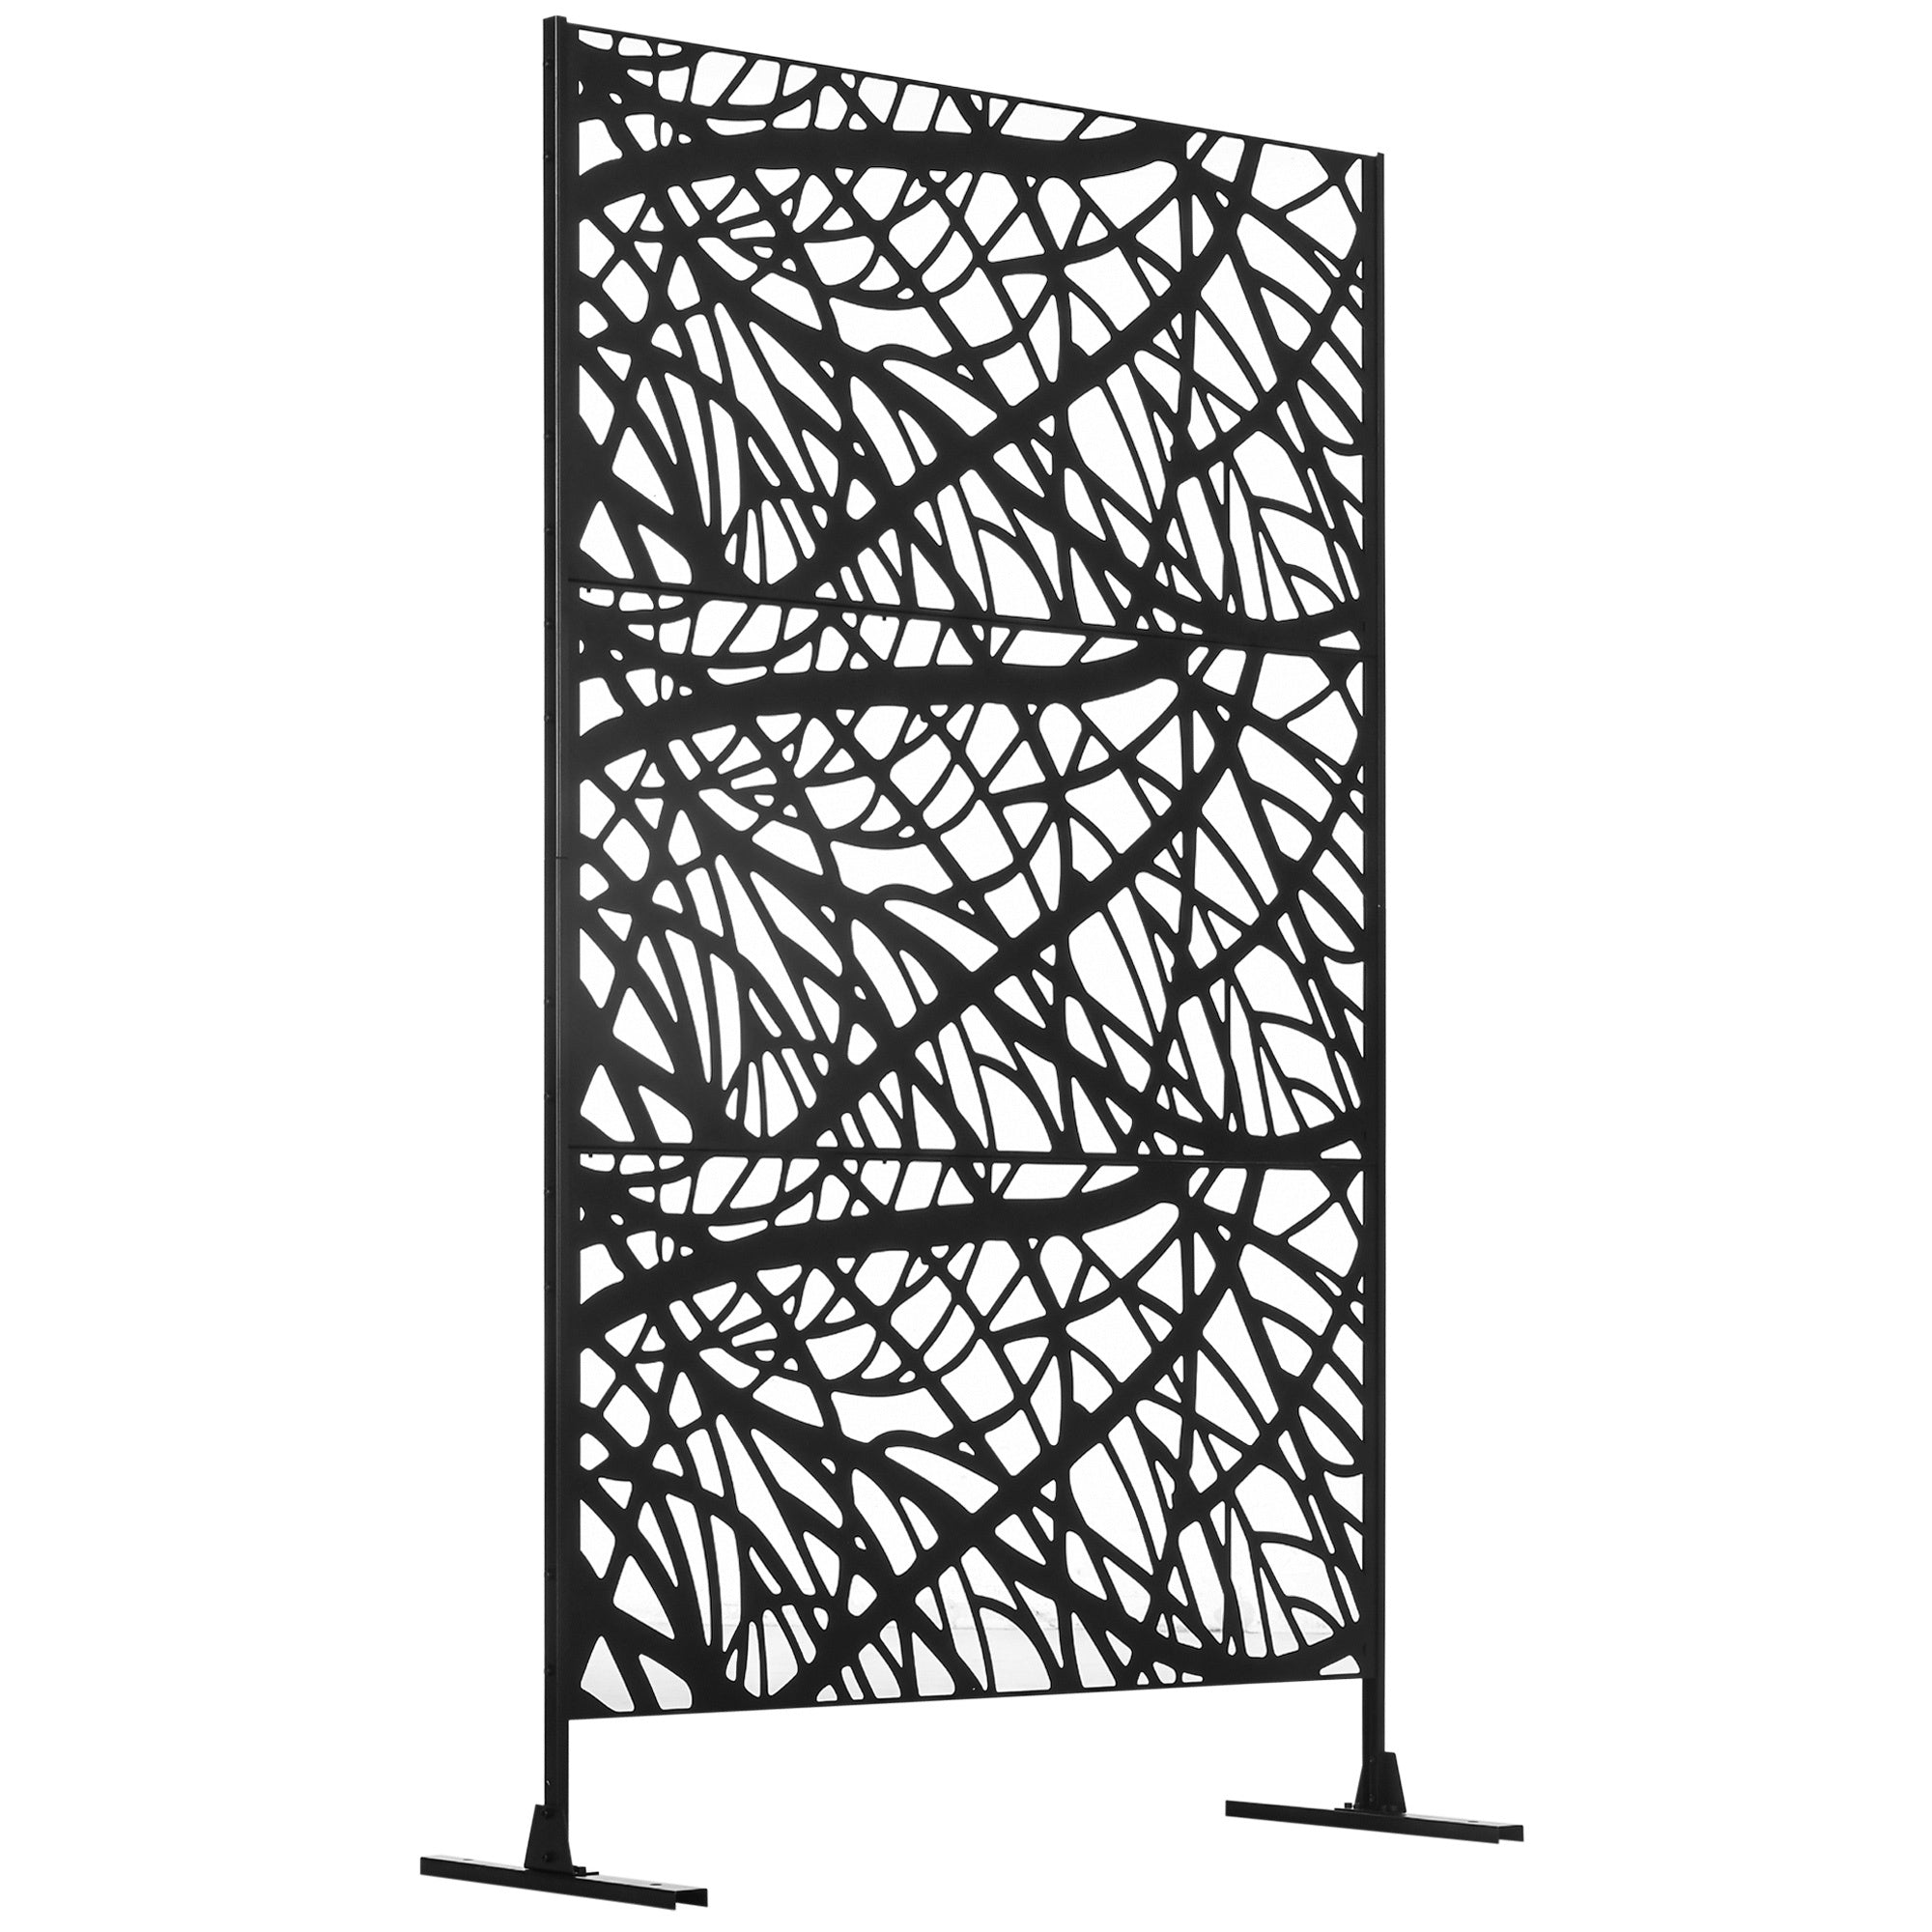 Outsunny Decorative Outdoor Privacy Screen, See